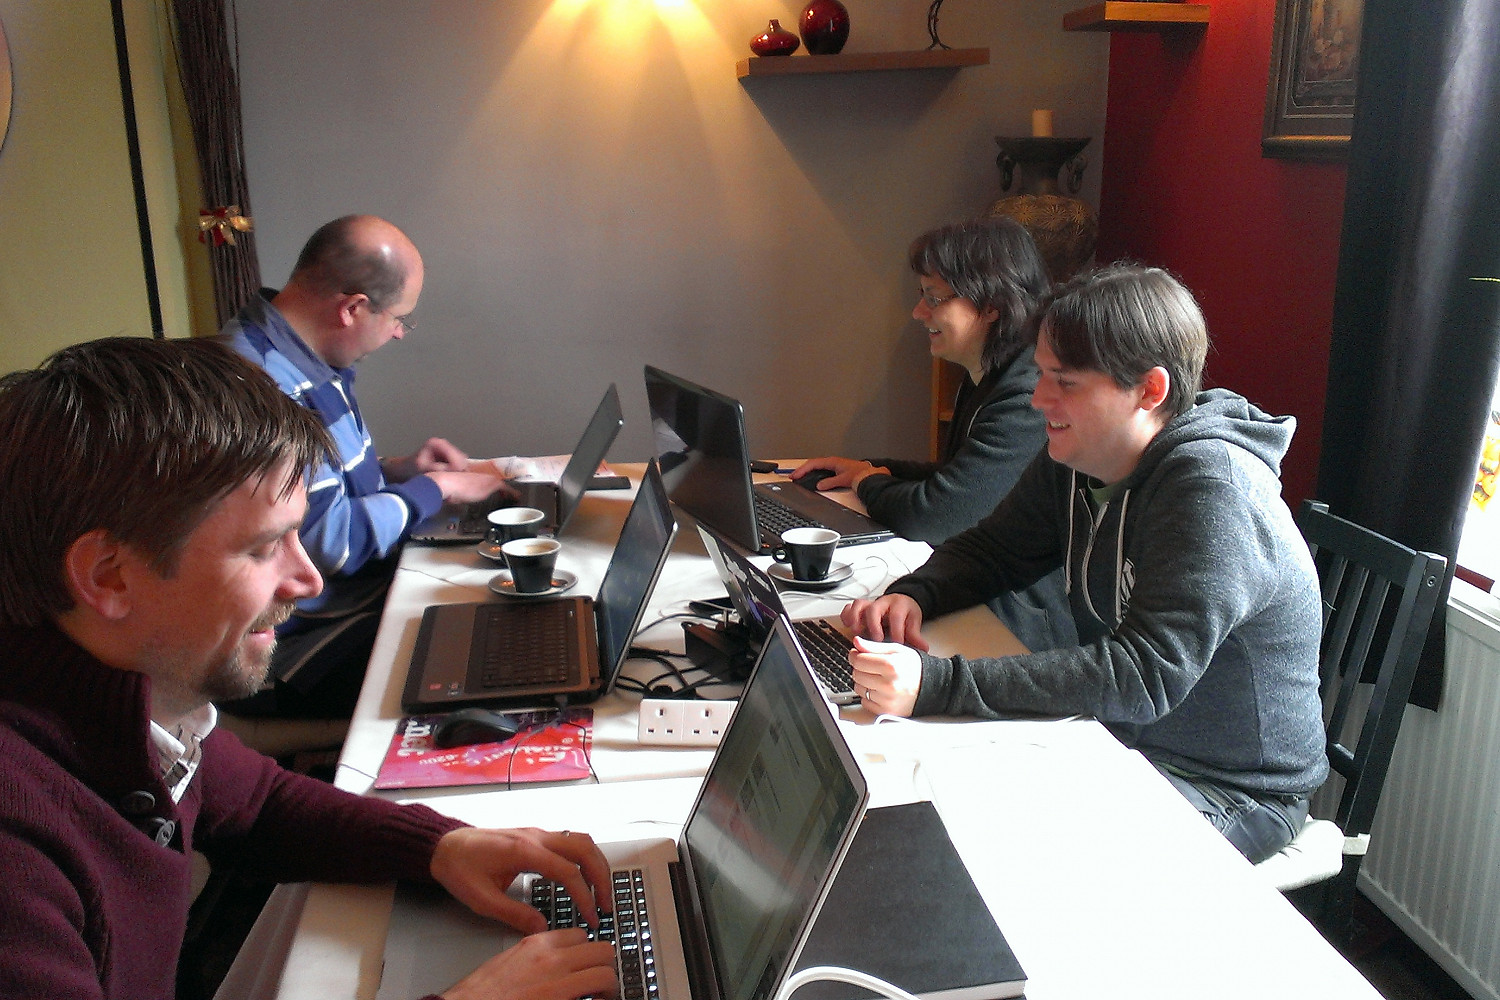 Working at a Horsham Coworking day